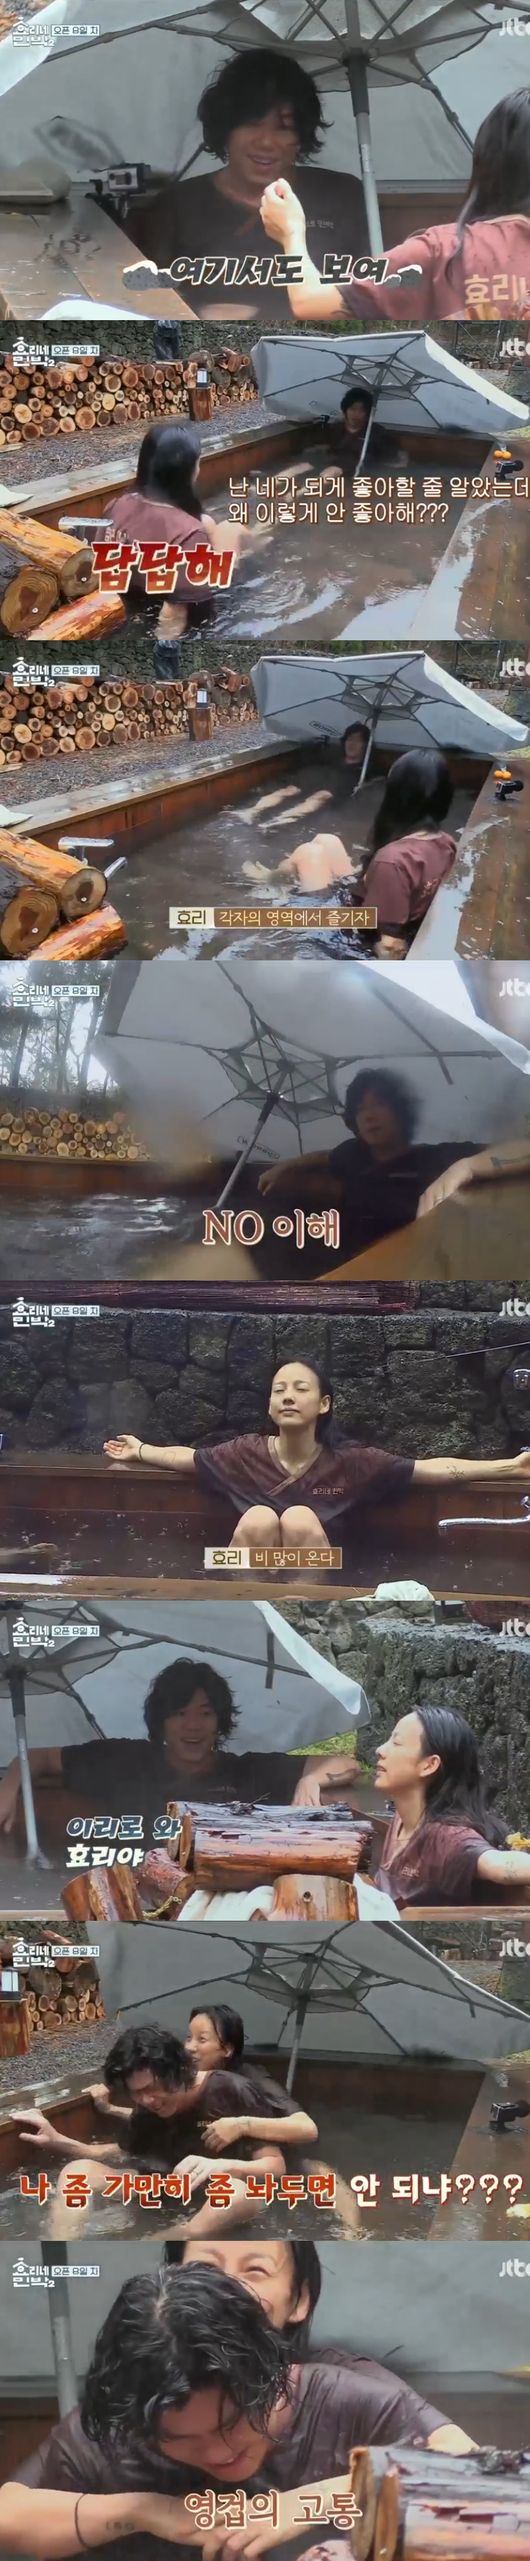 Lee Hyo ri and Sang Soon showed a quarrel for different tastes.Lee Hyo ri and Sang Soon who spent only two people in the Open-air bath after the customer had gone out.Matgeguda, who did not become Lee Hyo ri suitable for the rain, though the two married, even the process looked love.The viewers smiled at the two Open-air bath dates.